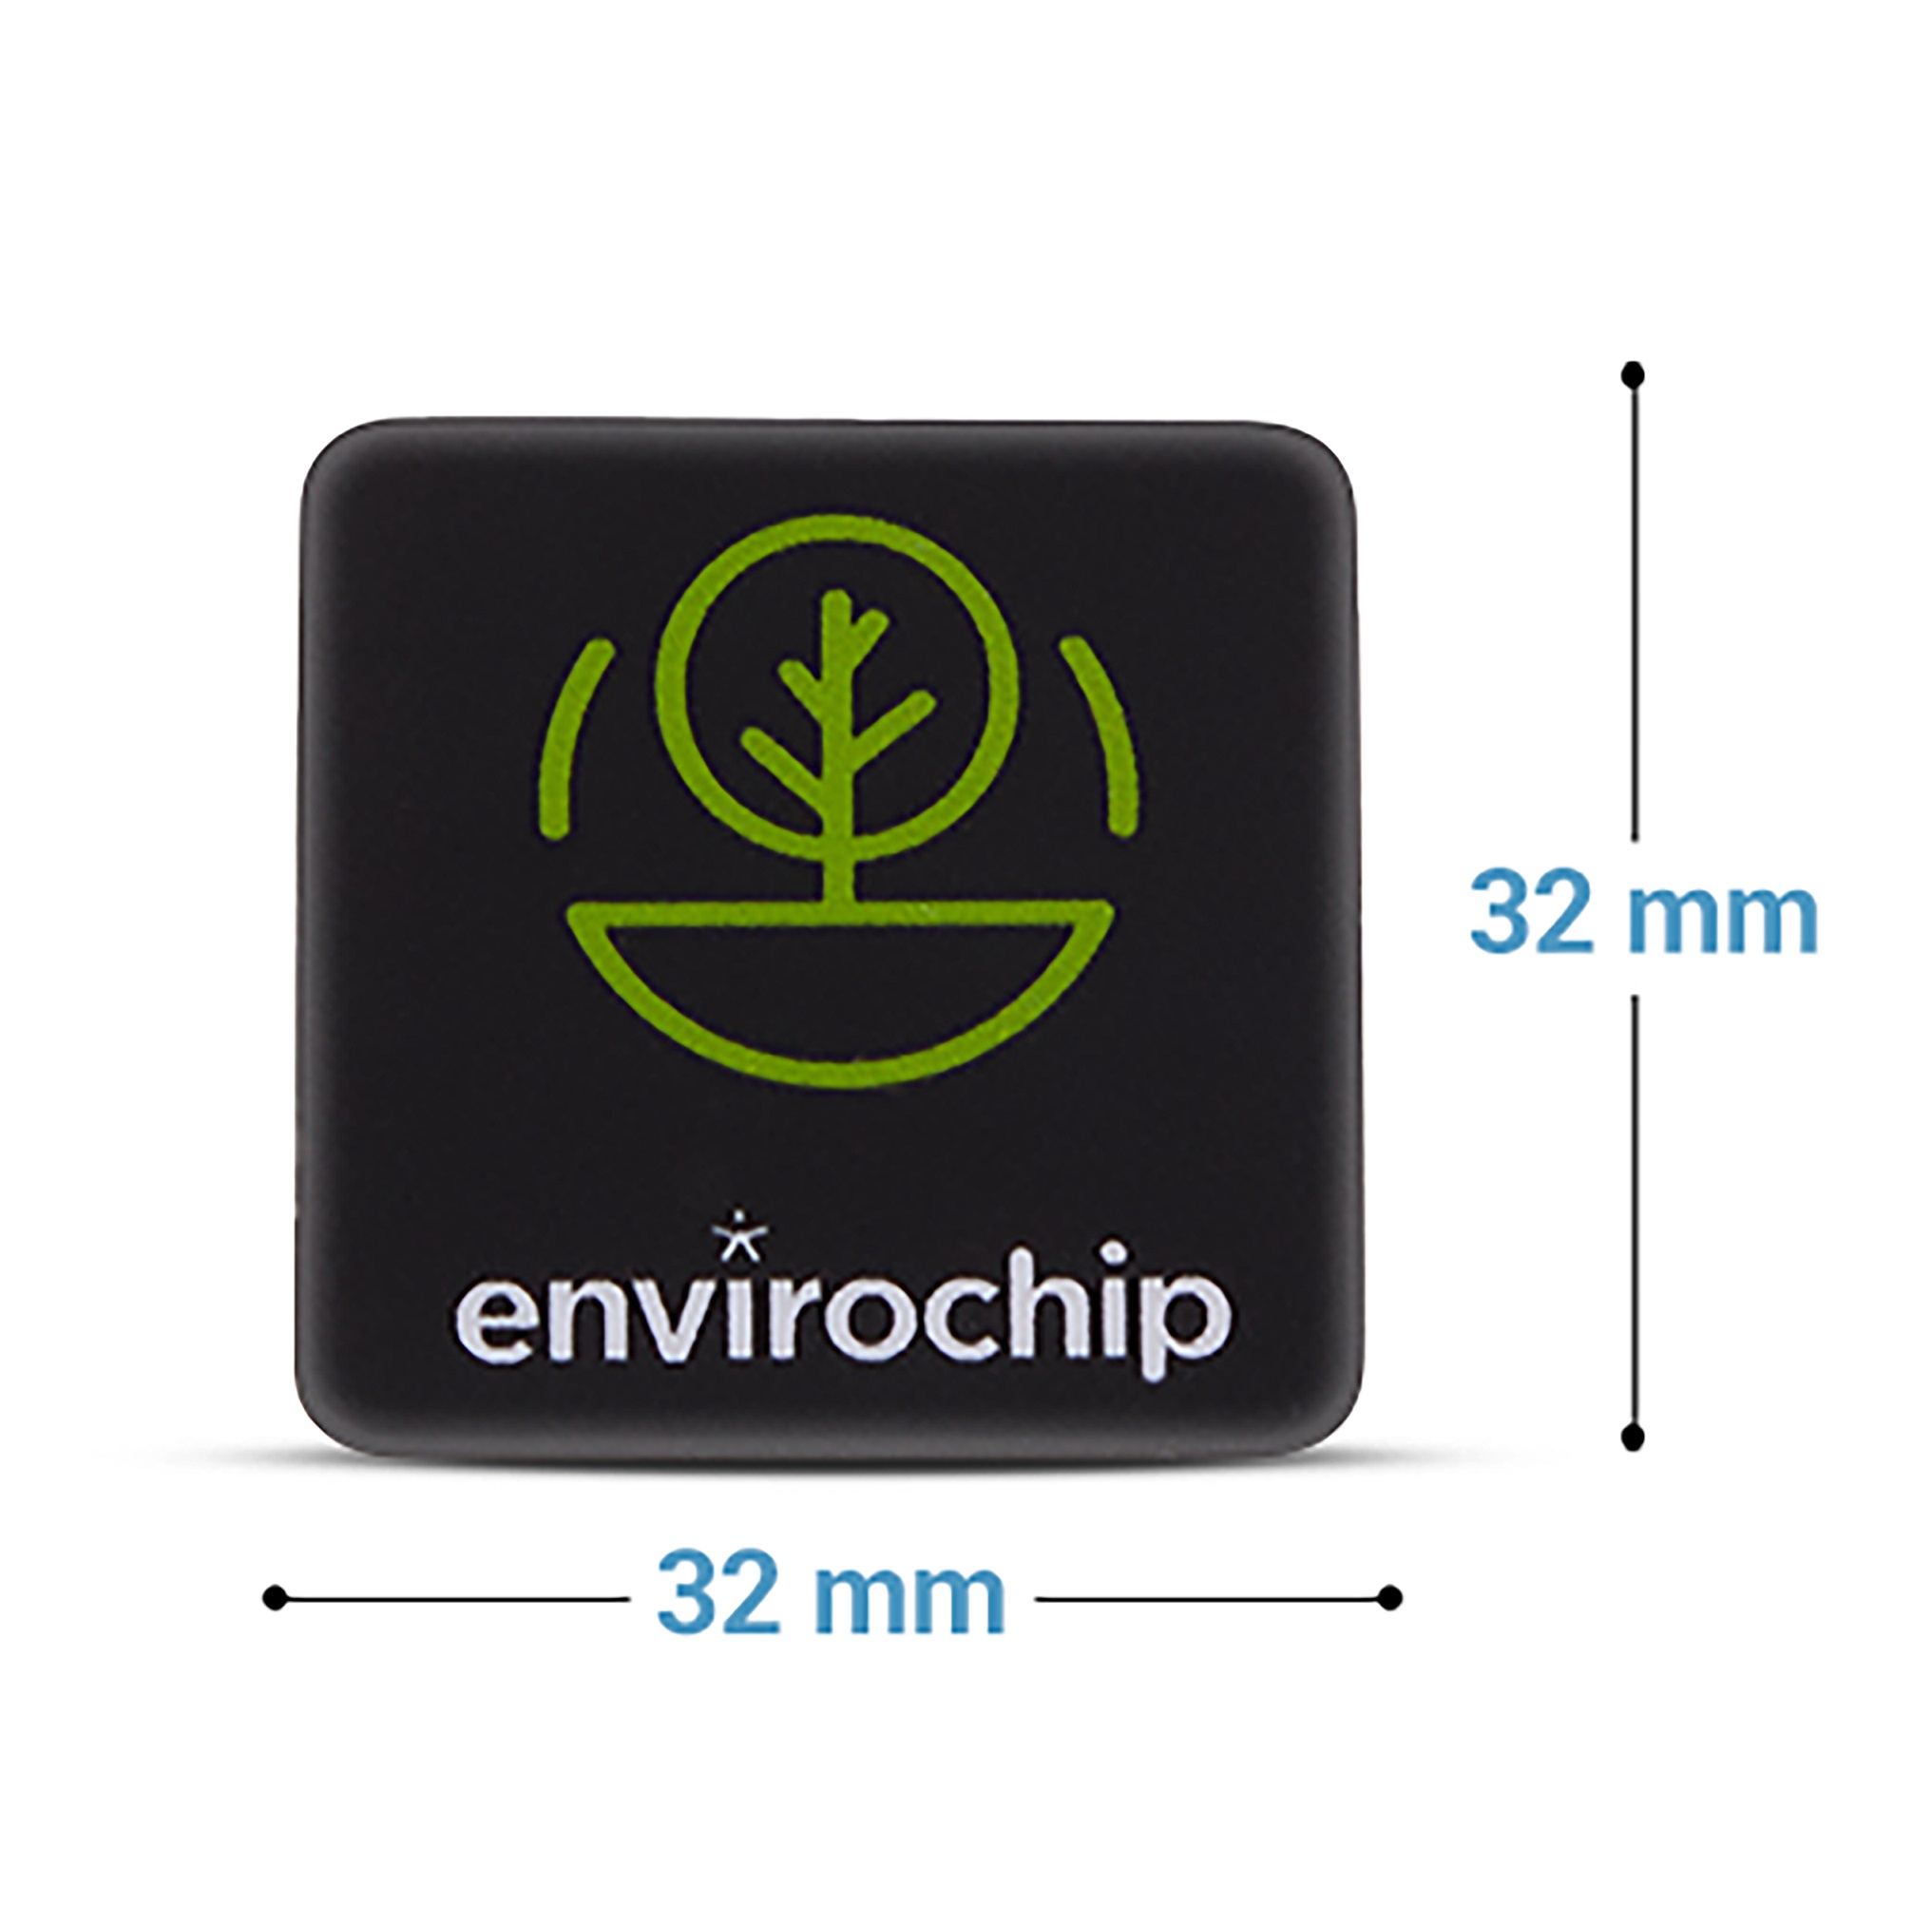 envirochip-clinically-tested-patented-anti-radiation-chip-for-tablet-wi-fi-router-pc-monitor-elements-design-earth-black